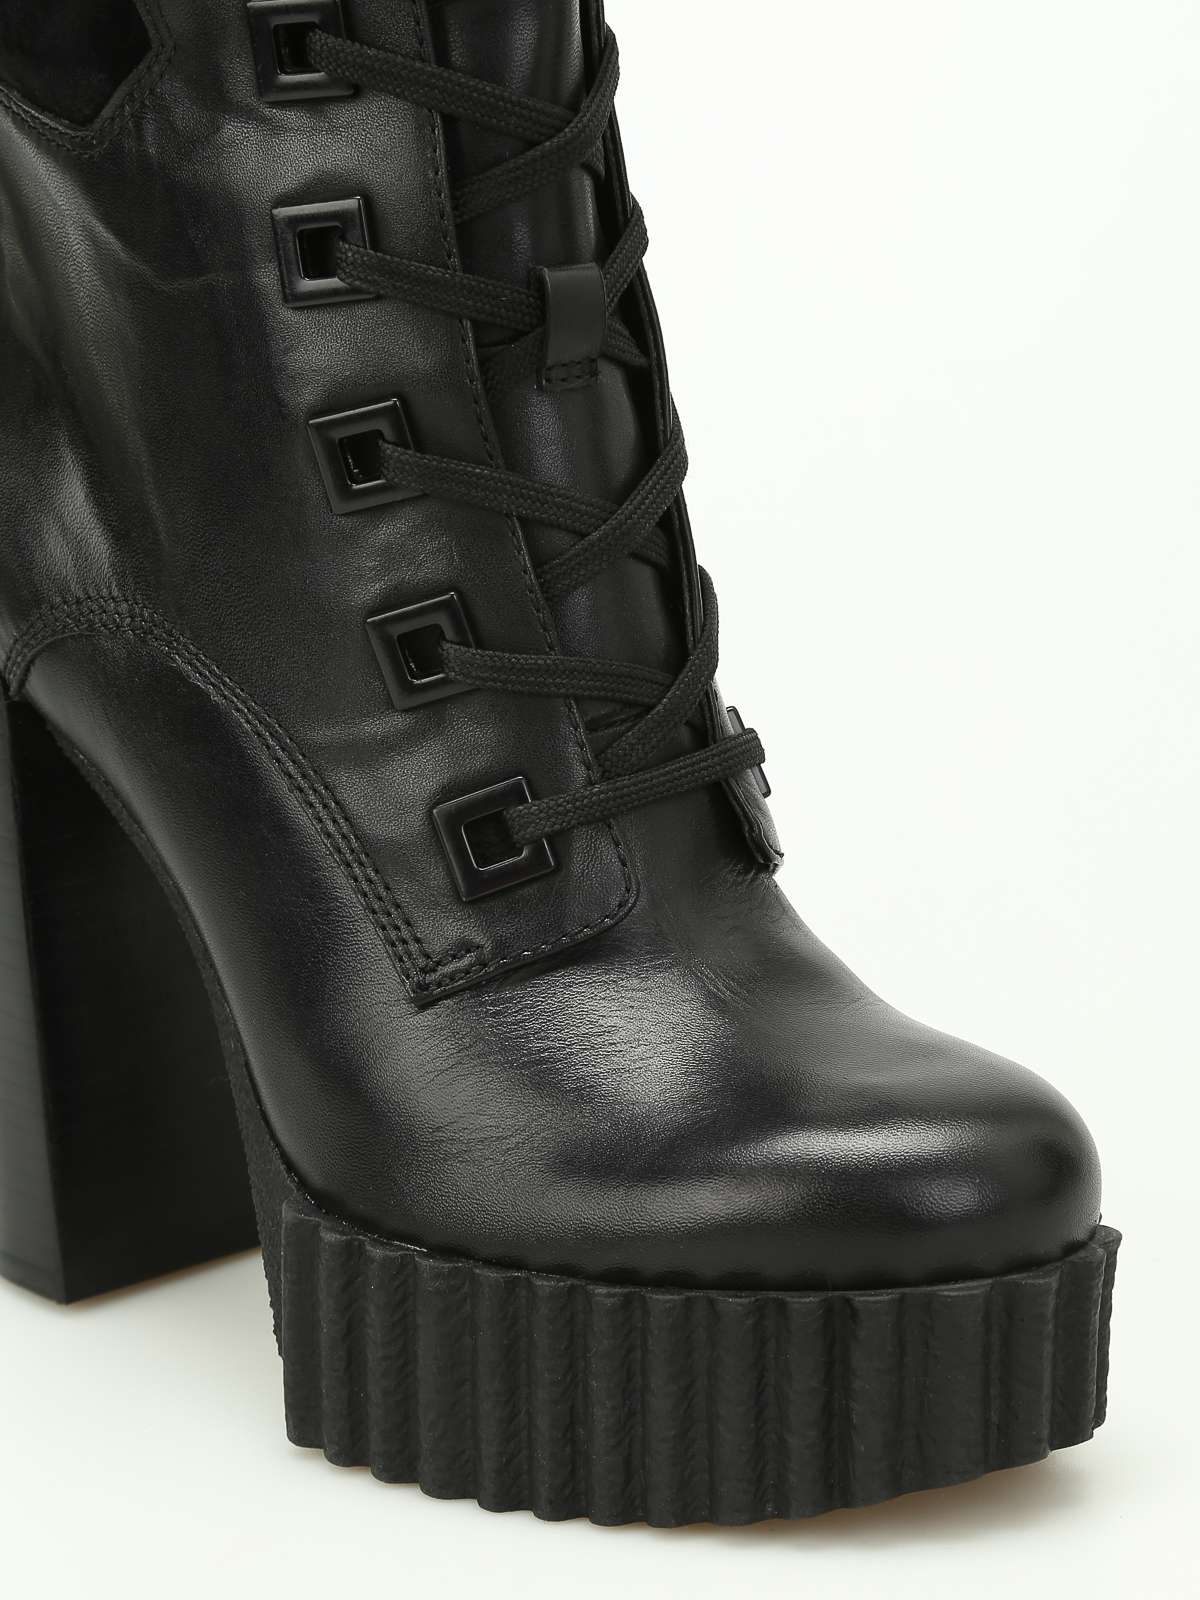 Ankle boots Kendall + Kylie - Coty military combat boots - KKCOTYB